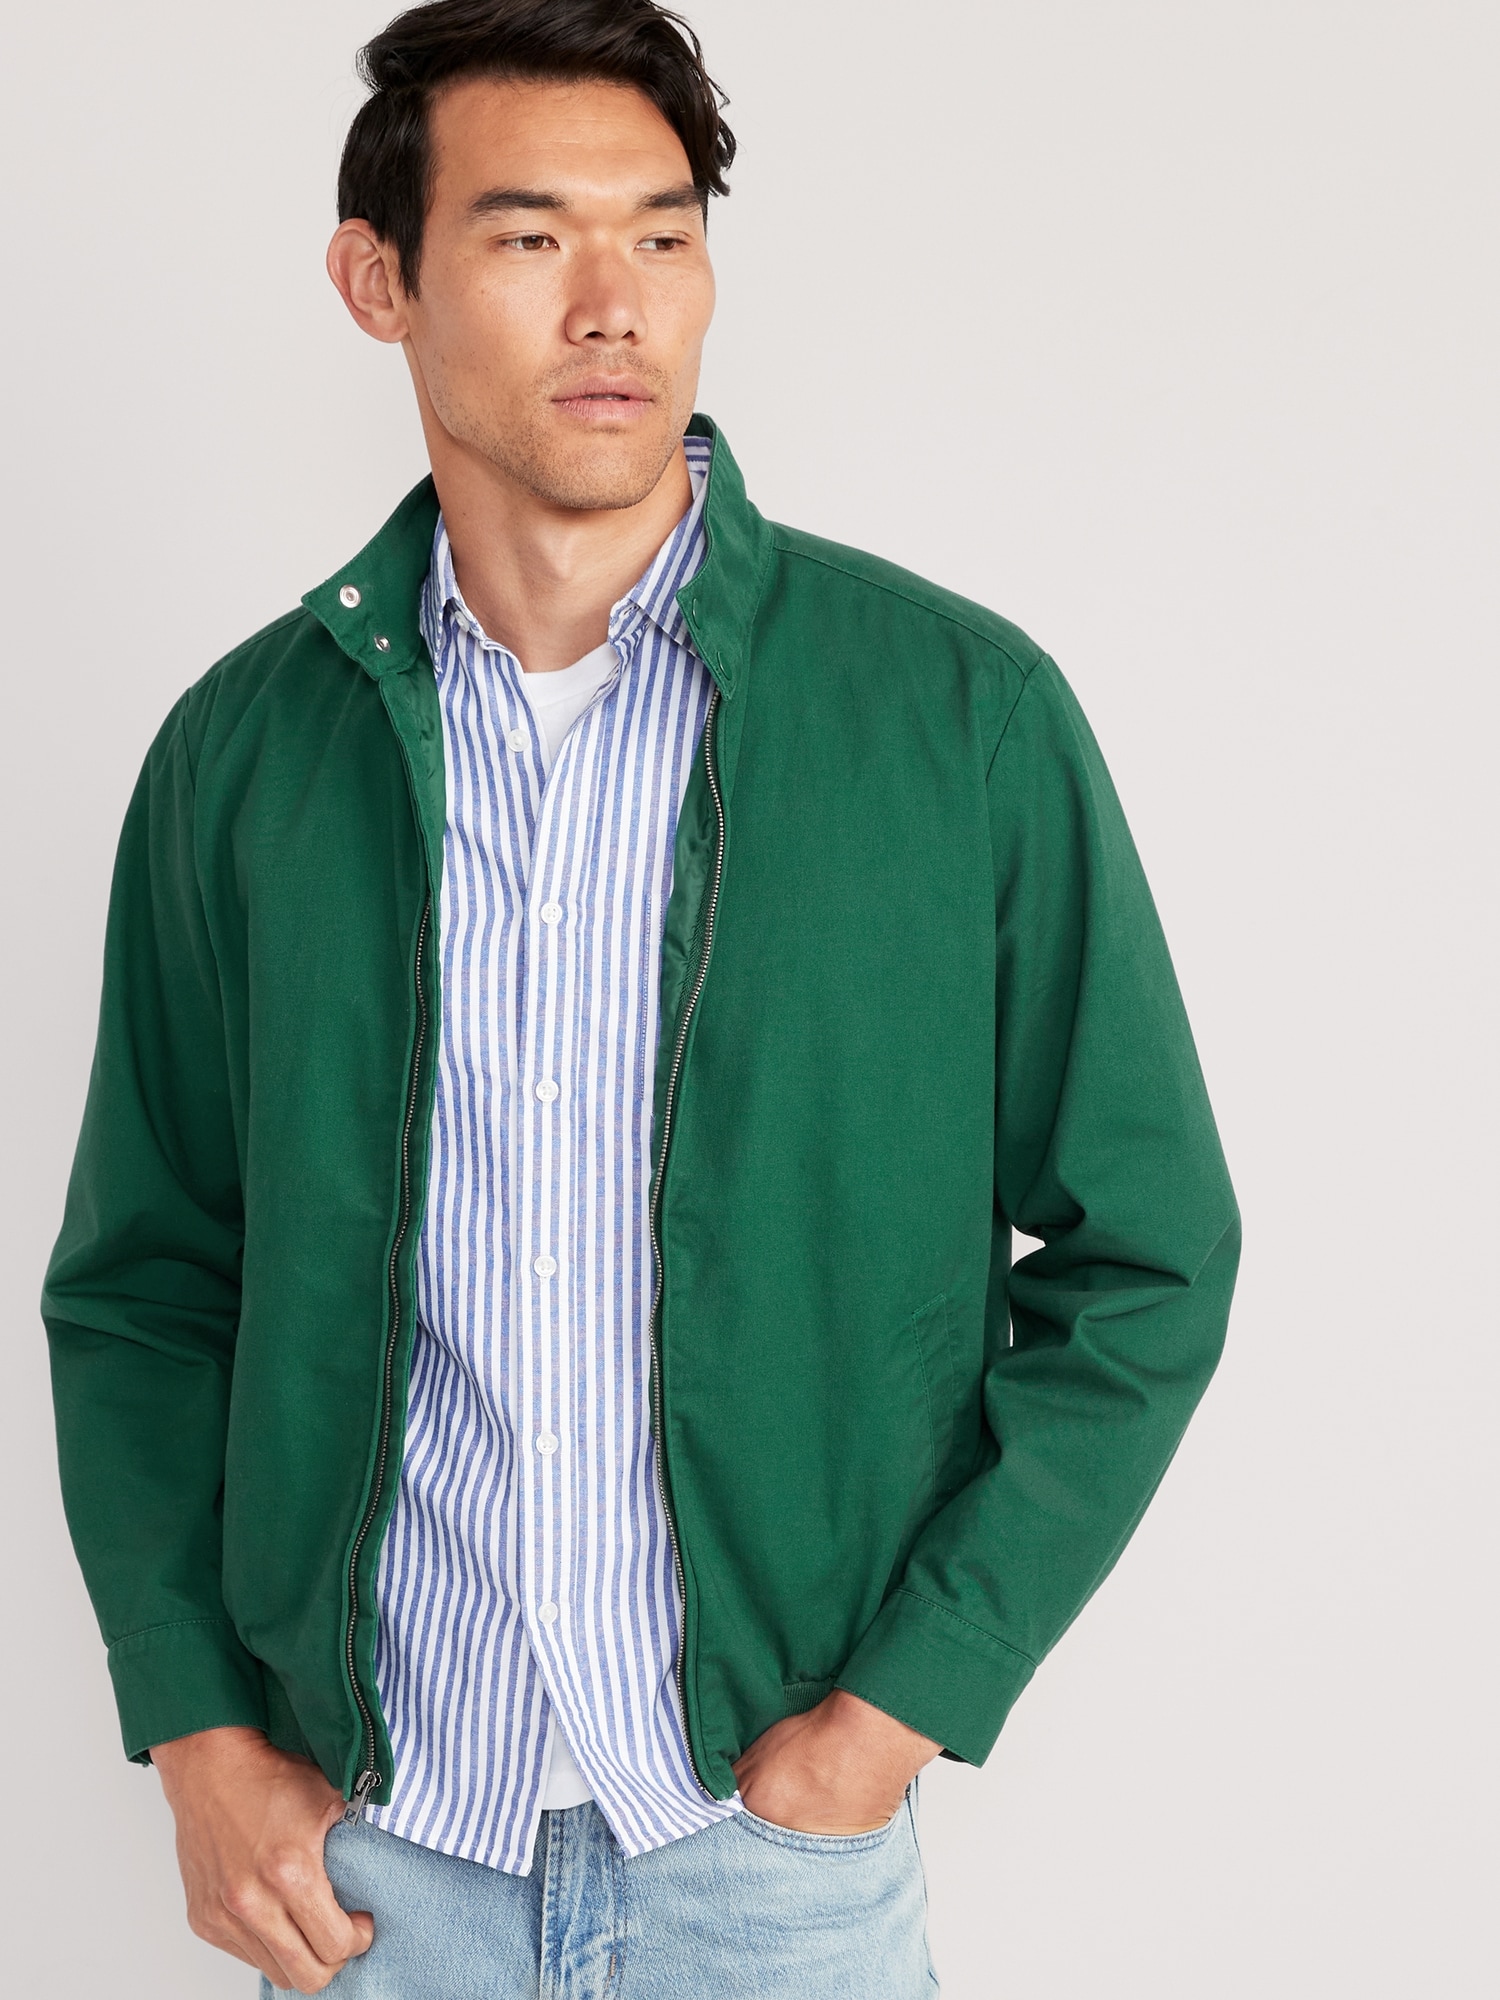 Buy Nuon by Westside Green Relaxed Fit Jacket for Online @ Tata CLiQ-seedfund.vn